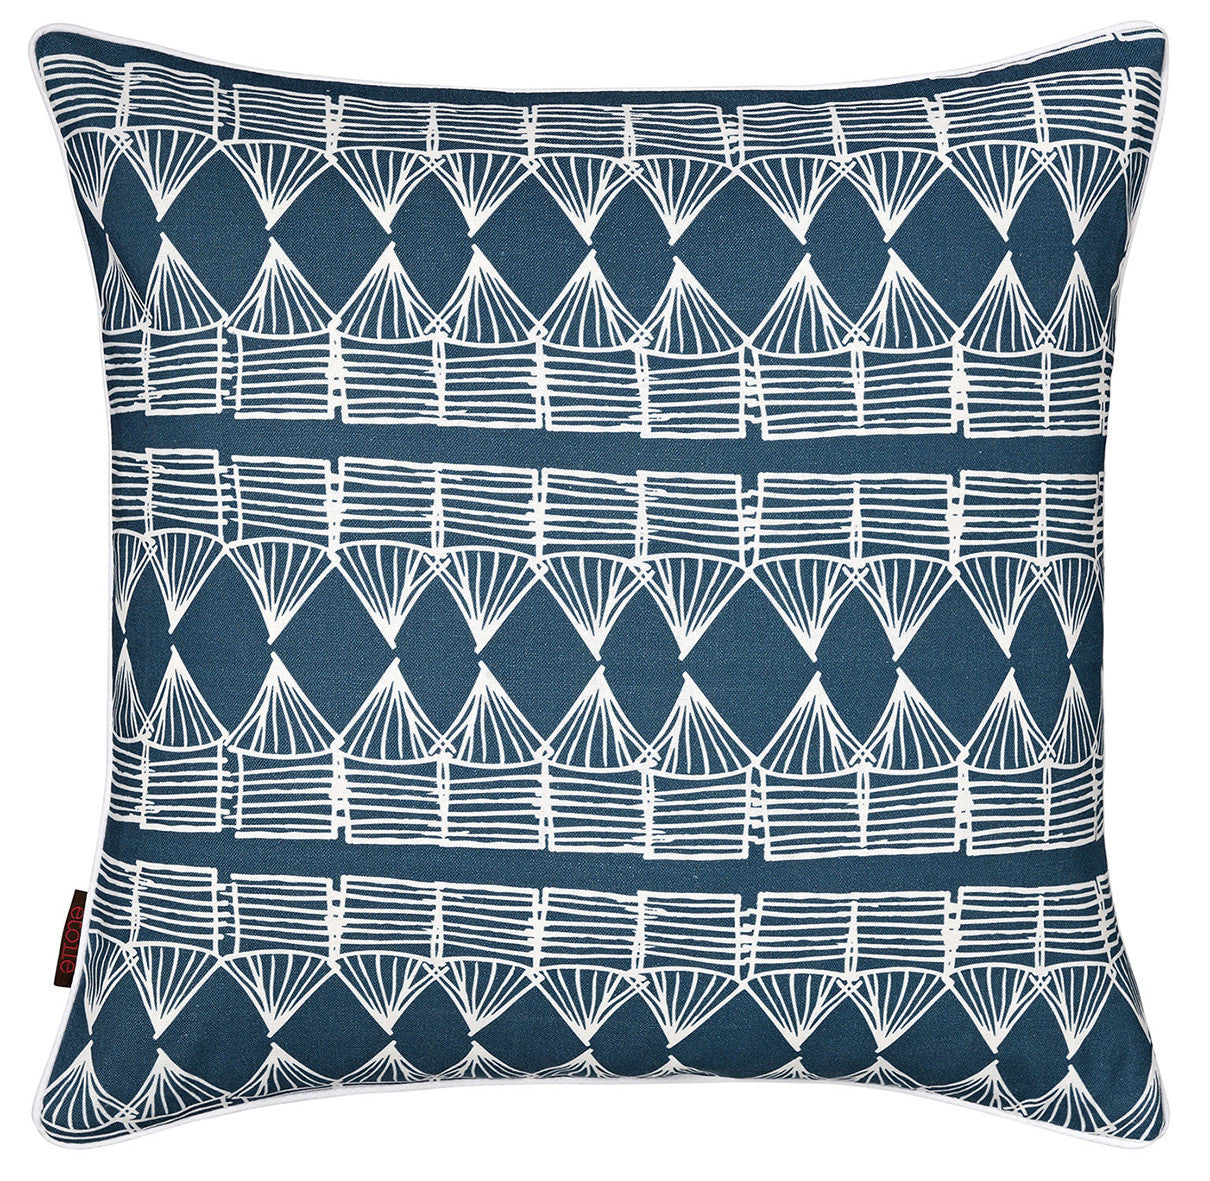 Tiki Huts Pattern Linen Cotton Throw Pillow Cushion in Dark Petrol Blue 45x45cm 18x18" ships from Canada worldwide including the USA